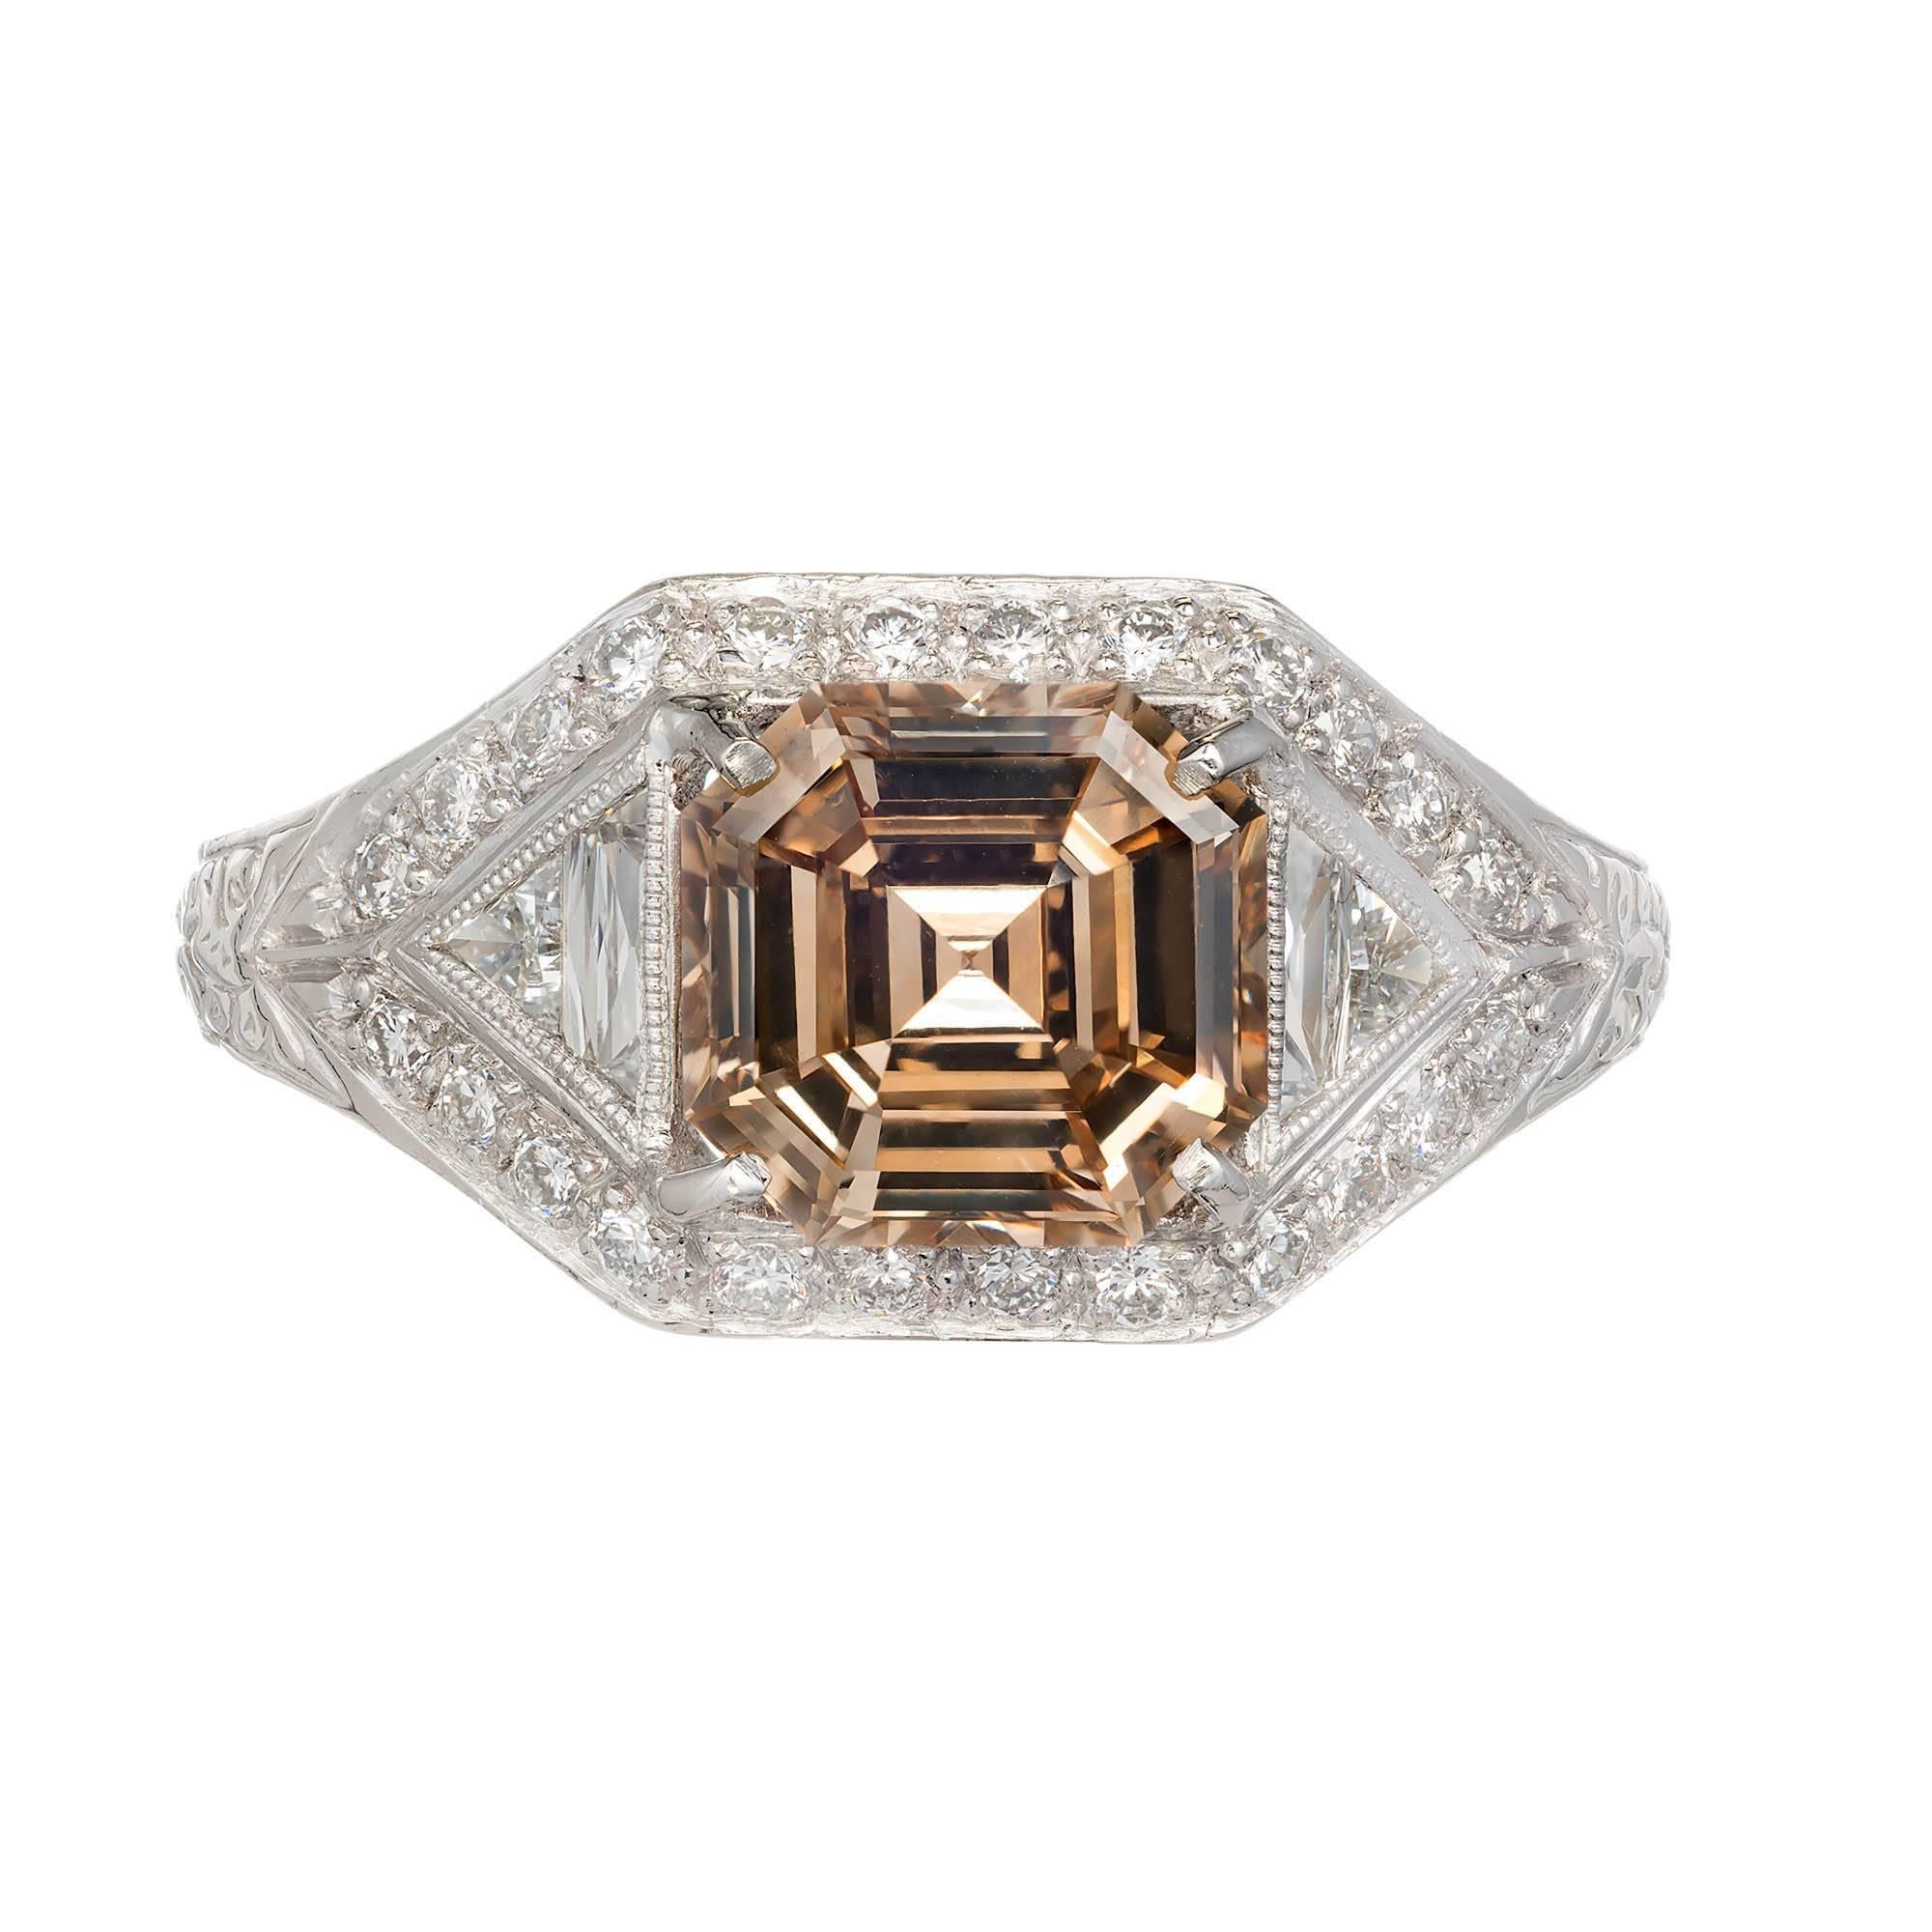 Natural 2.00ct Asscher cut diamond yellow brown color engagement ring, in a platinum setting surrounded by calibre diamonds. Setting designed by the Peter Suchy Workshop

1 original Asscher step cut fancy yellow brown diamond, approx. total weight